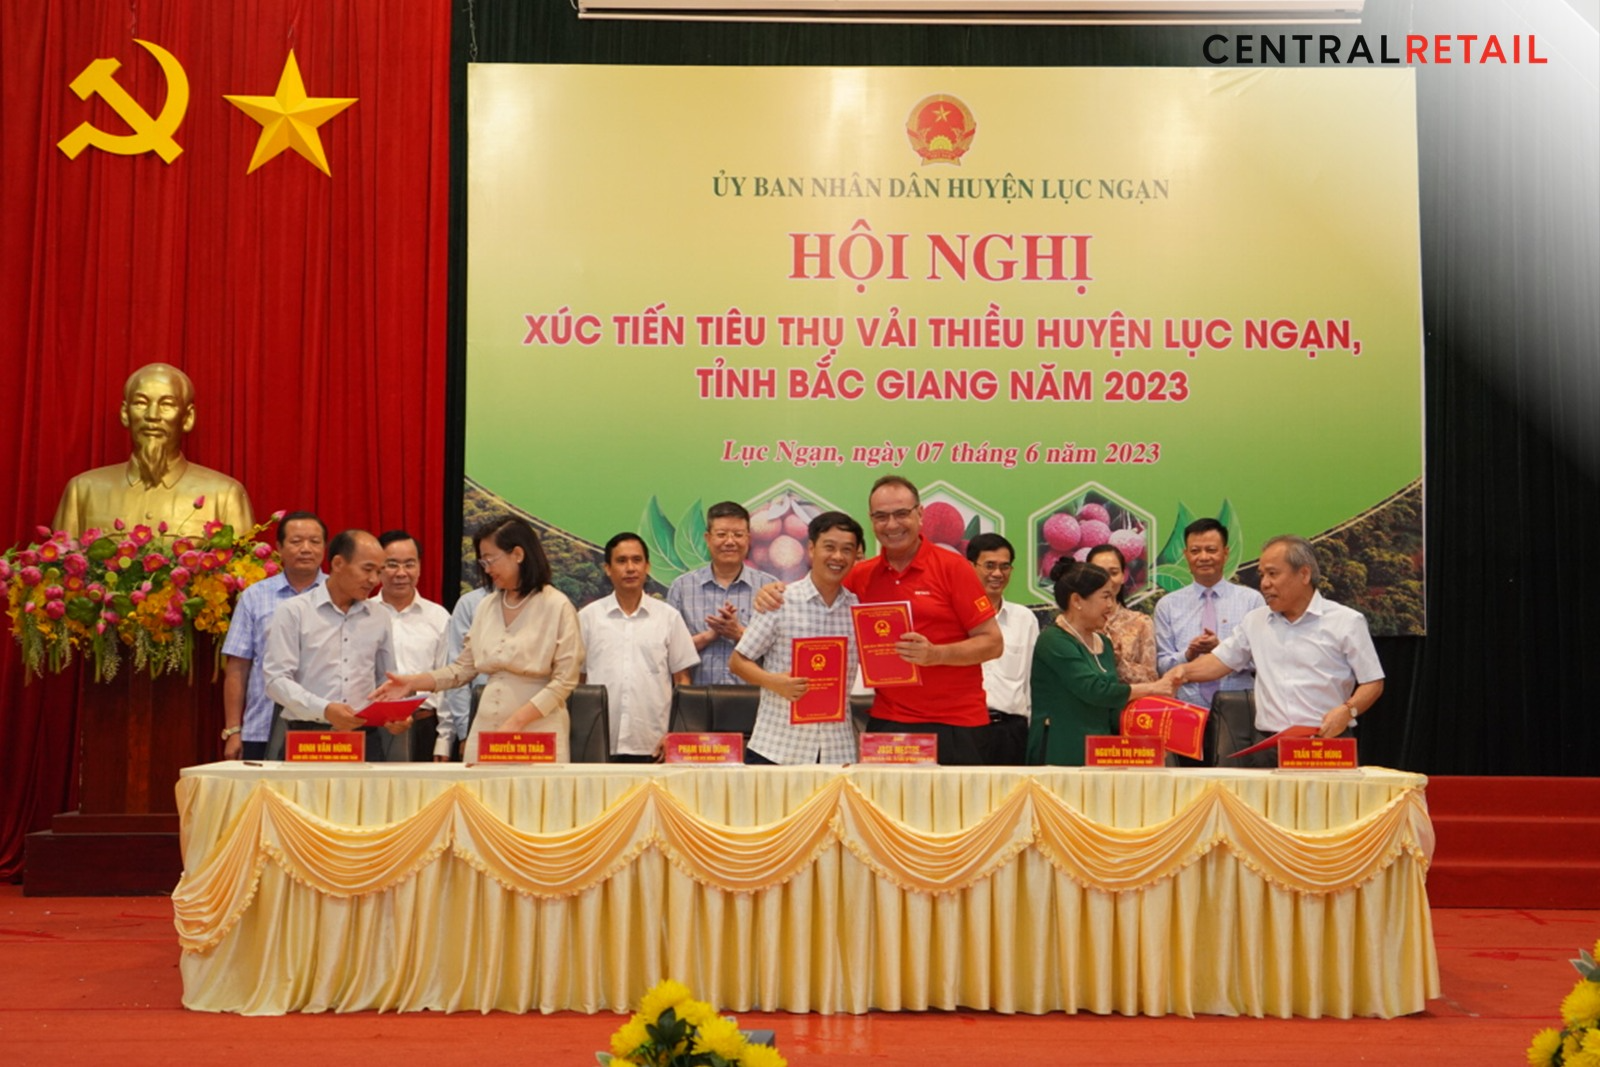 Central Retail in Vietnam participated in the Luc Ngan Lychee Sales Promotion Conference